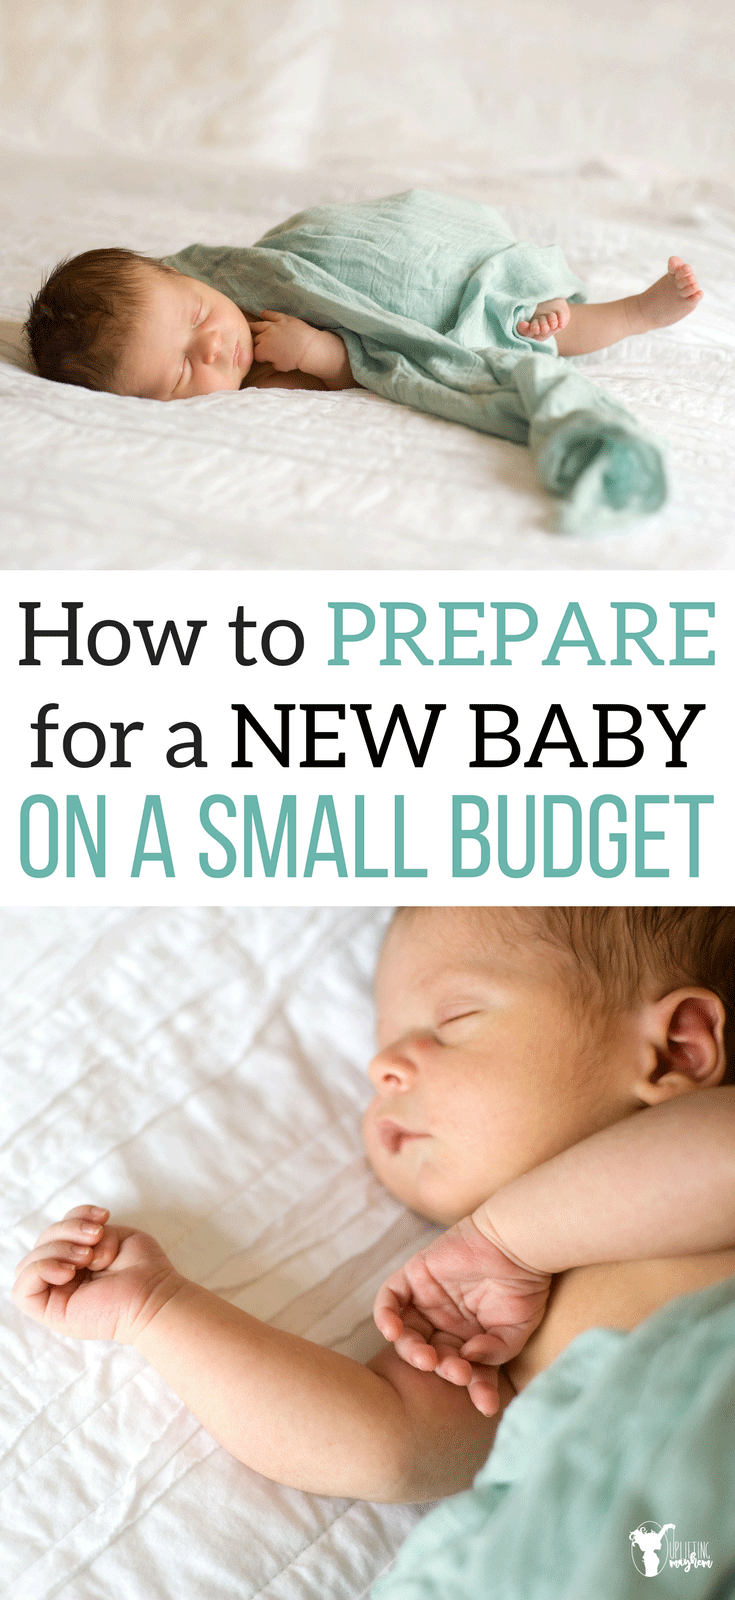 Where do you start when you need a budget for a new baby? Great tips to guide you on budgeting and saving money for your new baby! 